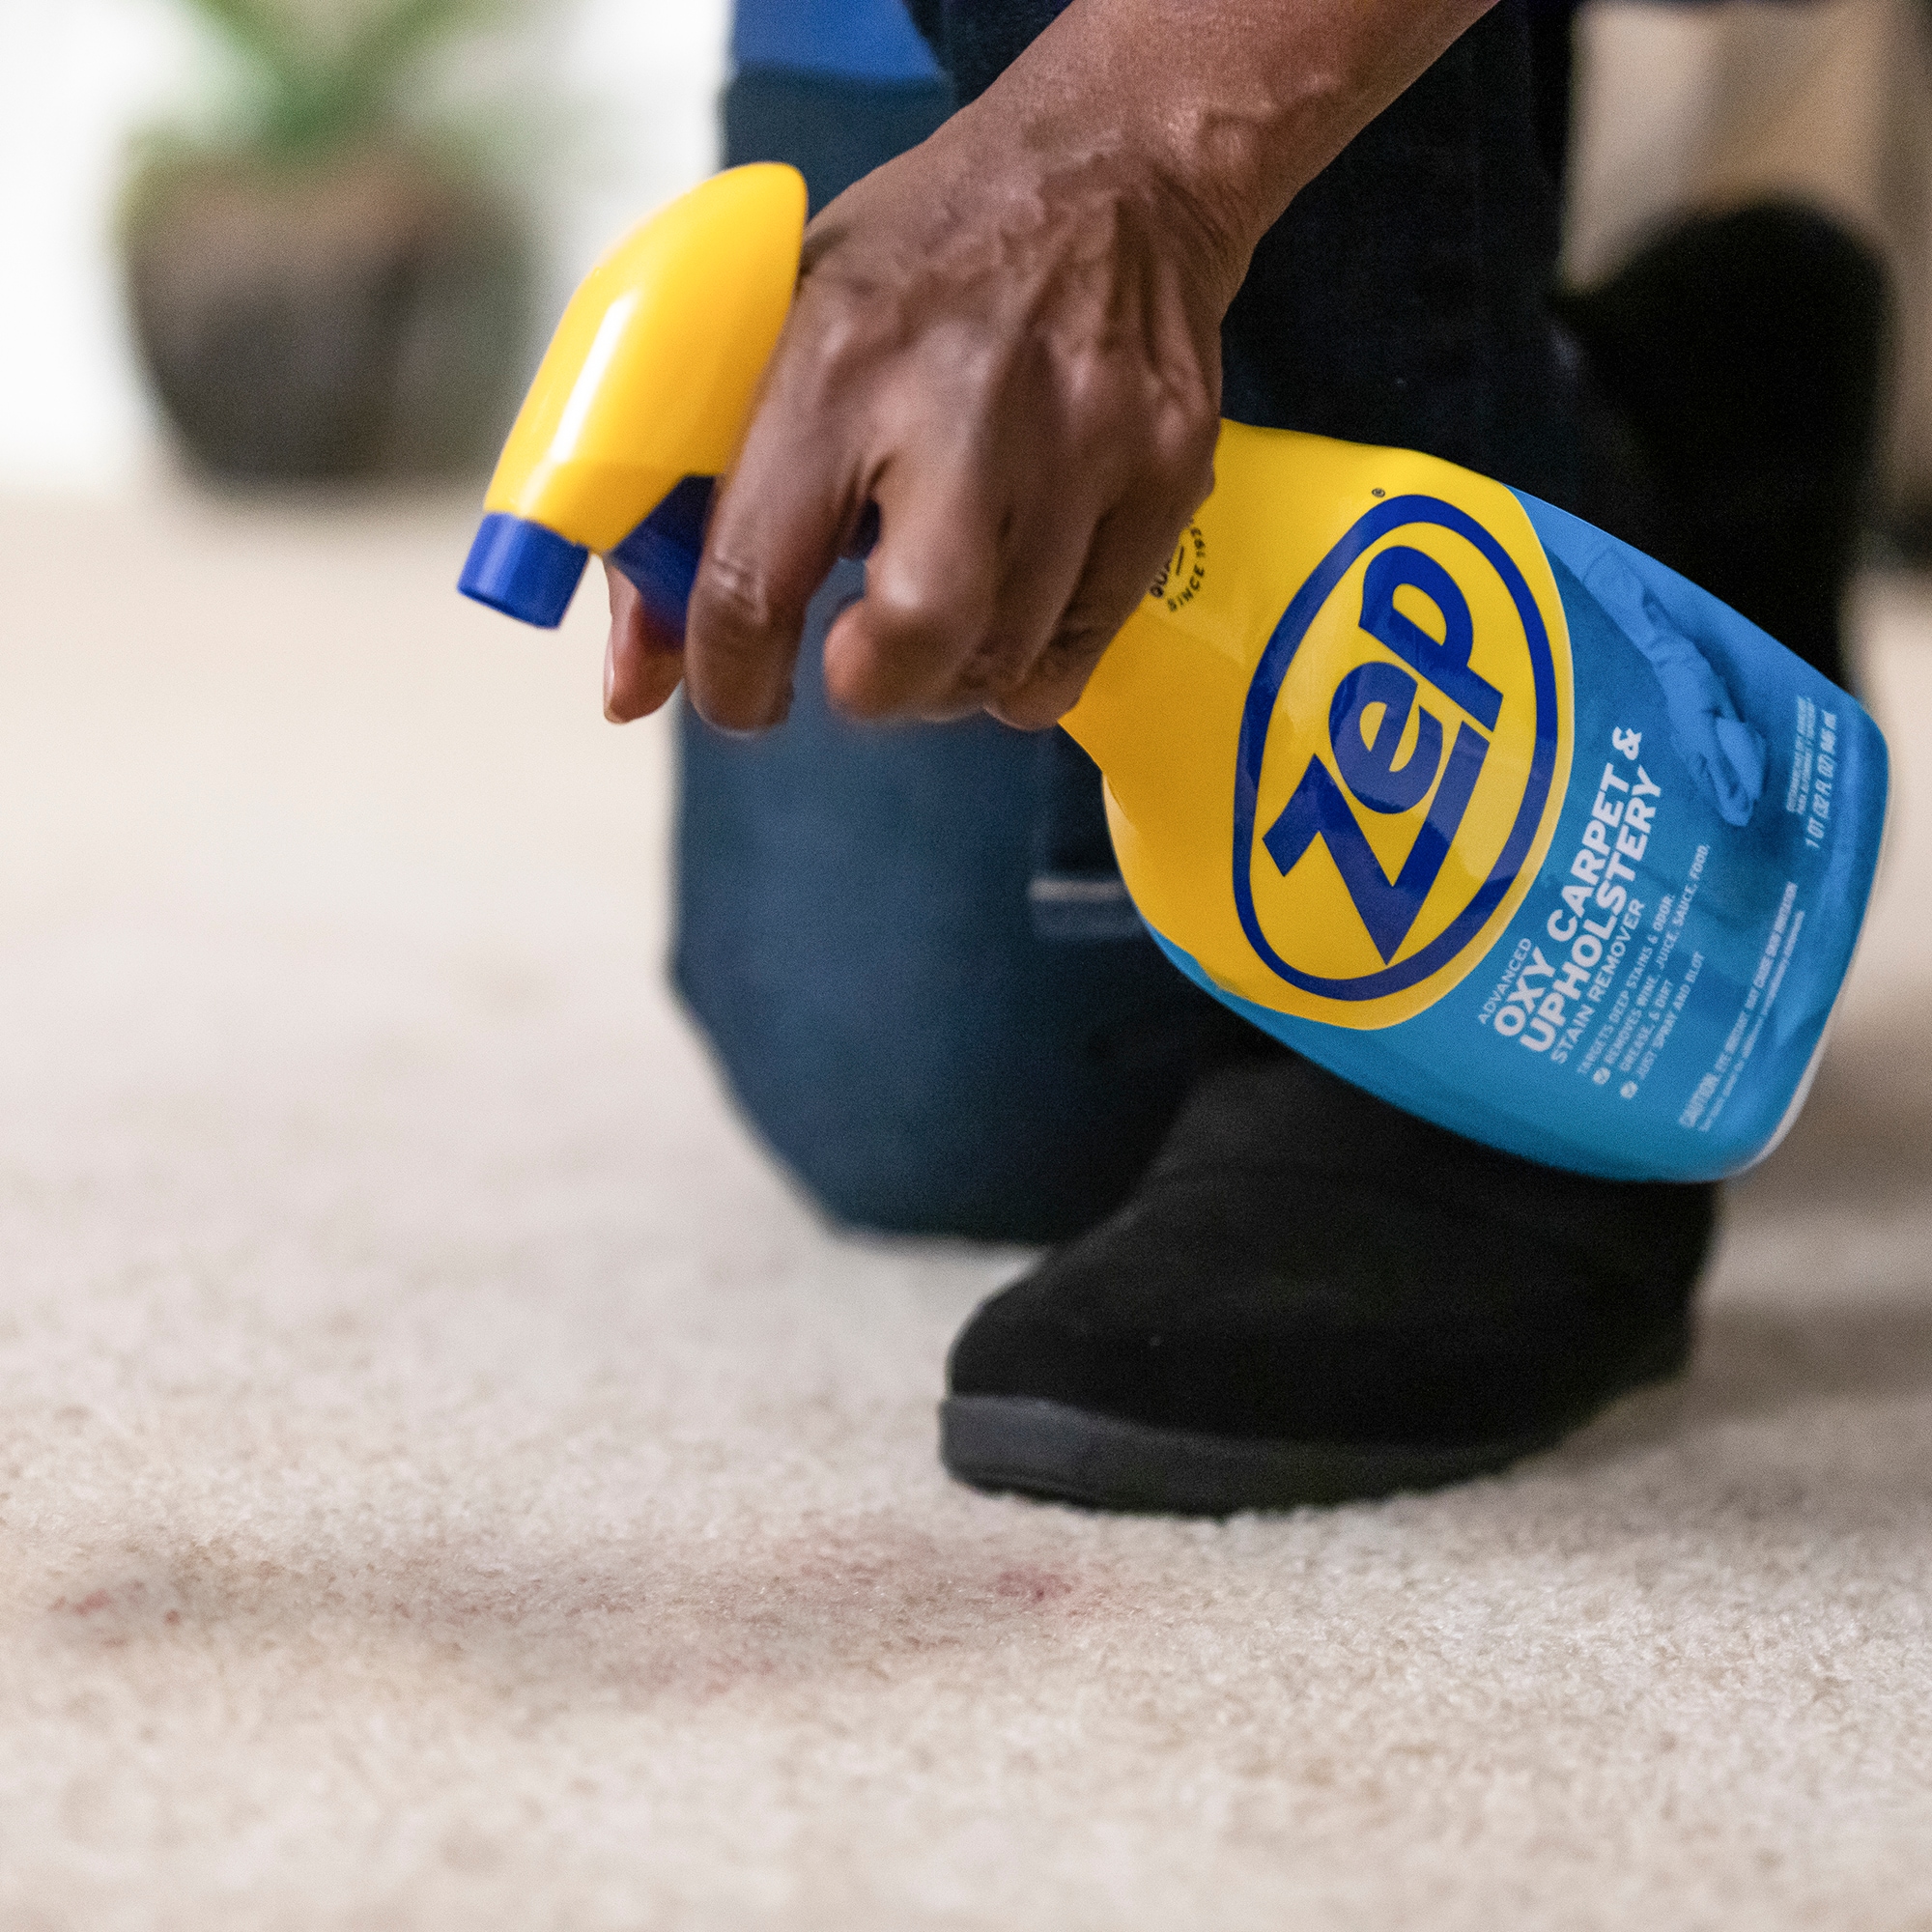 zep cleaner for carpet stains｜TikTok Search